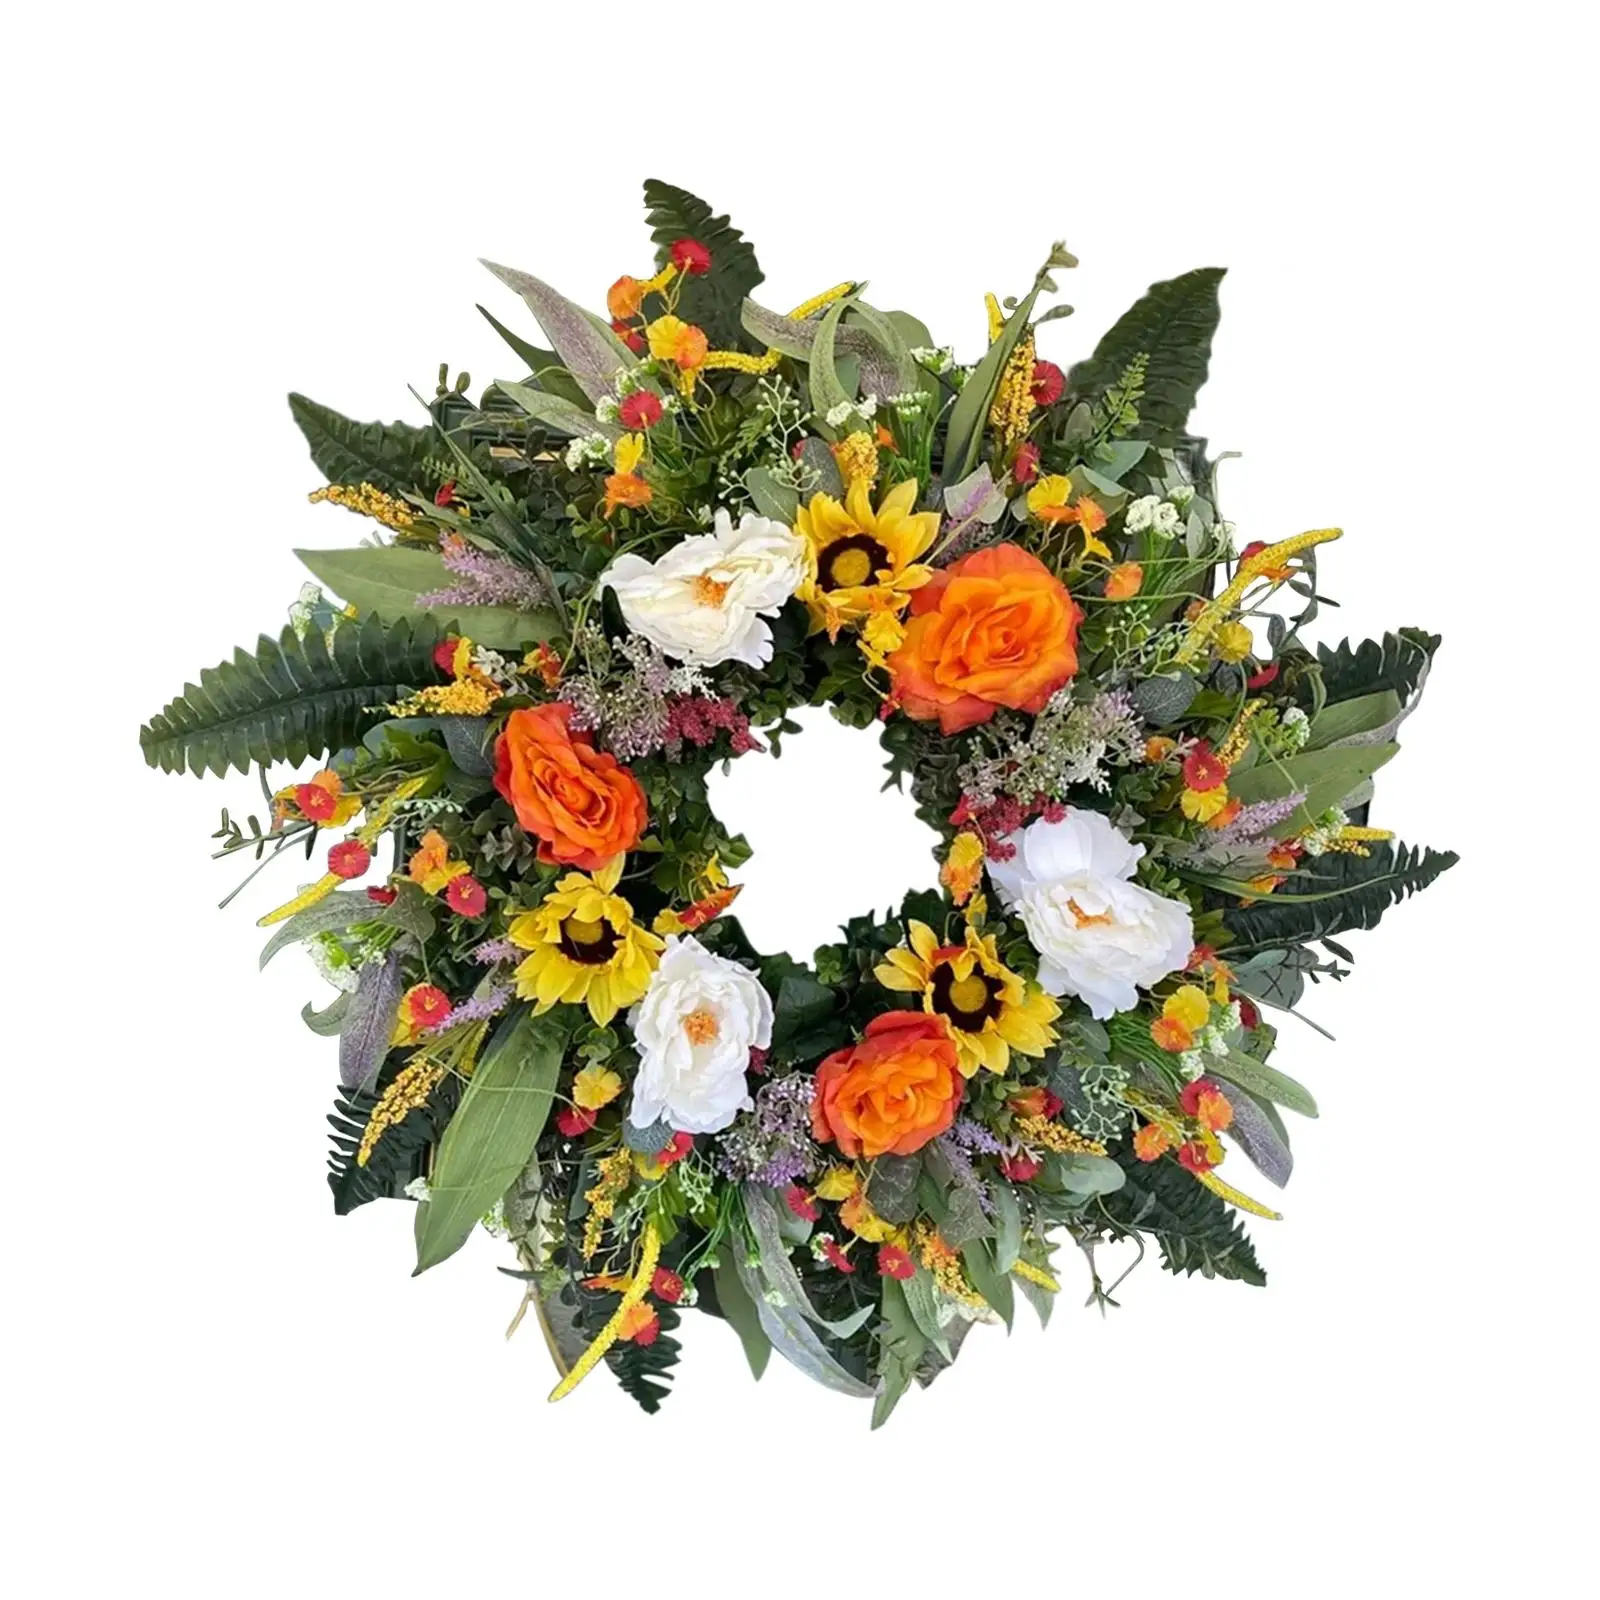 Artificial Flower Wreath Greenery Wreaths Wall Hanging Fall Wreath 15.7inch Floral Wreath for Celebration Festival Holiday Home